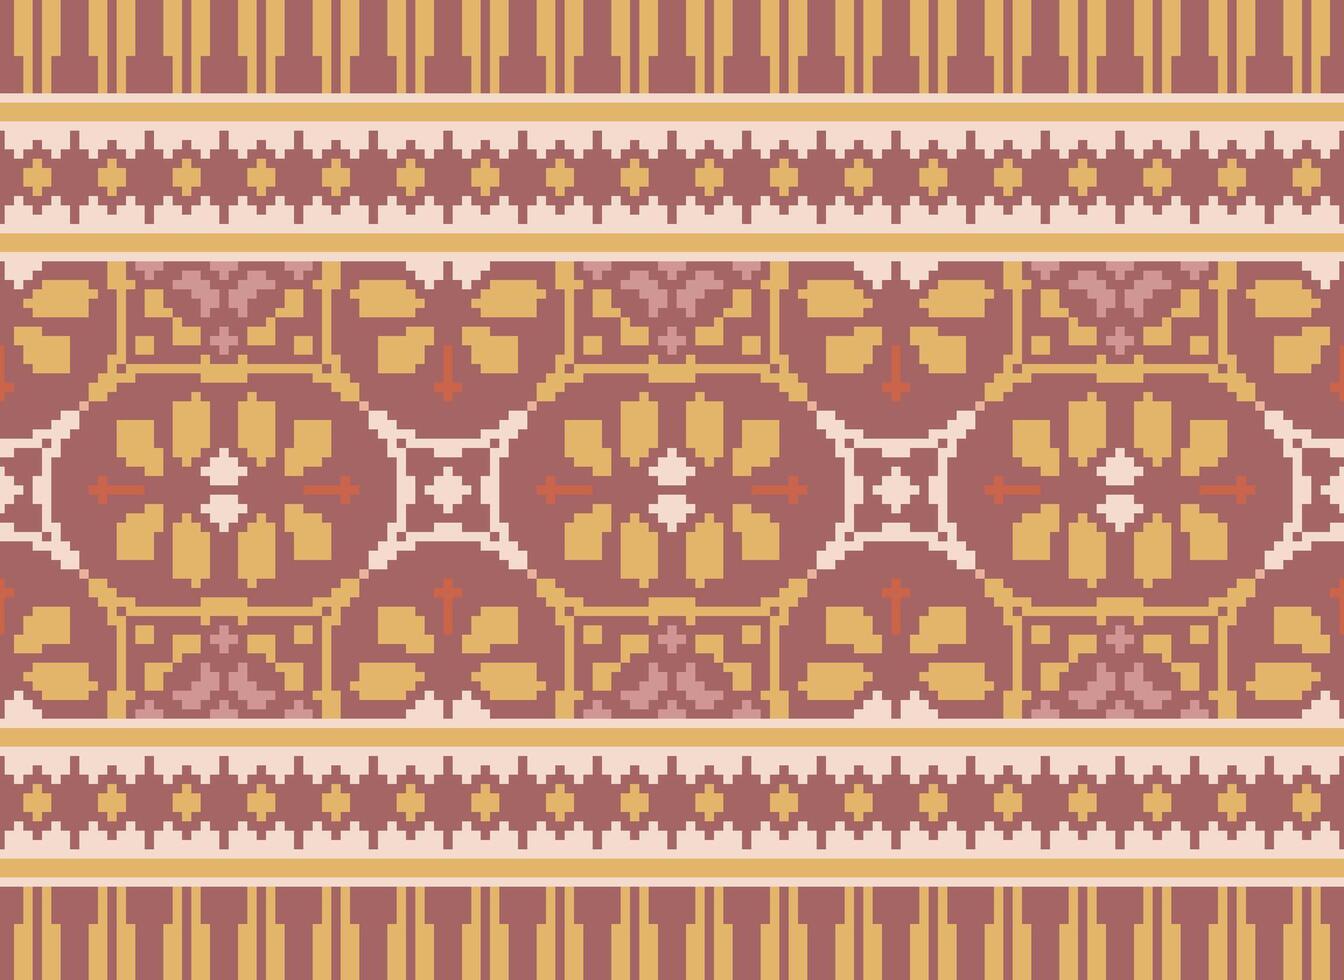 American ethnic native pattern.Traditional Navajo,Aztec,Apache,Southwest and Mexican style fabric pattern.Abstract motifs pattern.Design for fabric,clothing,blanket,carpet,woven,wrap,decoration vector